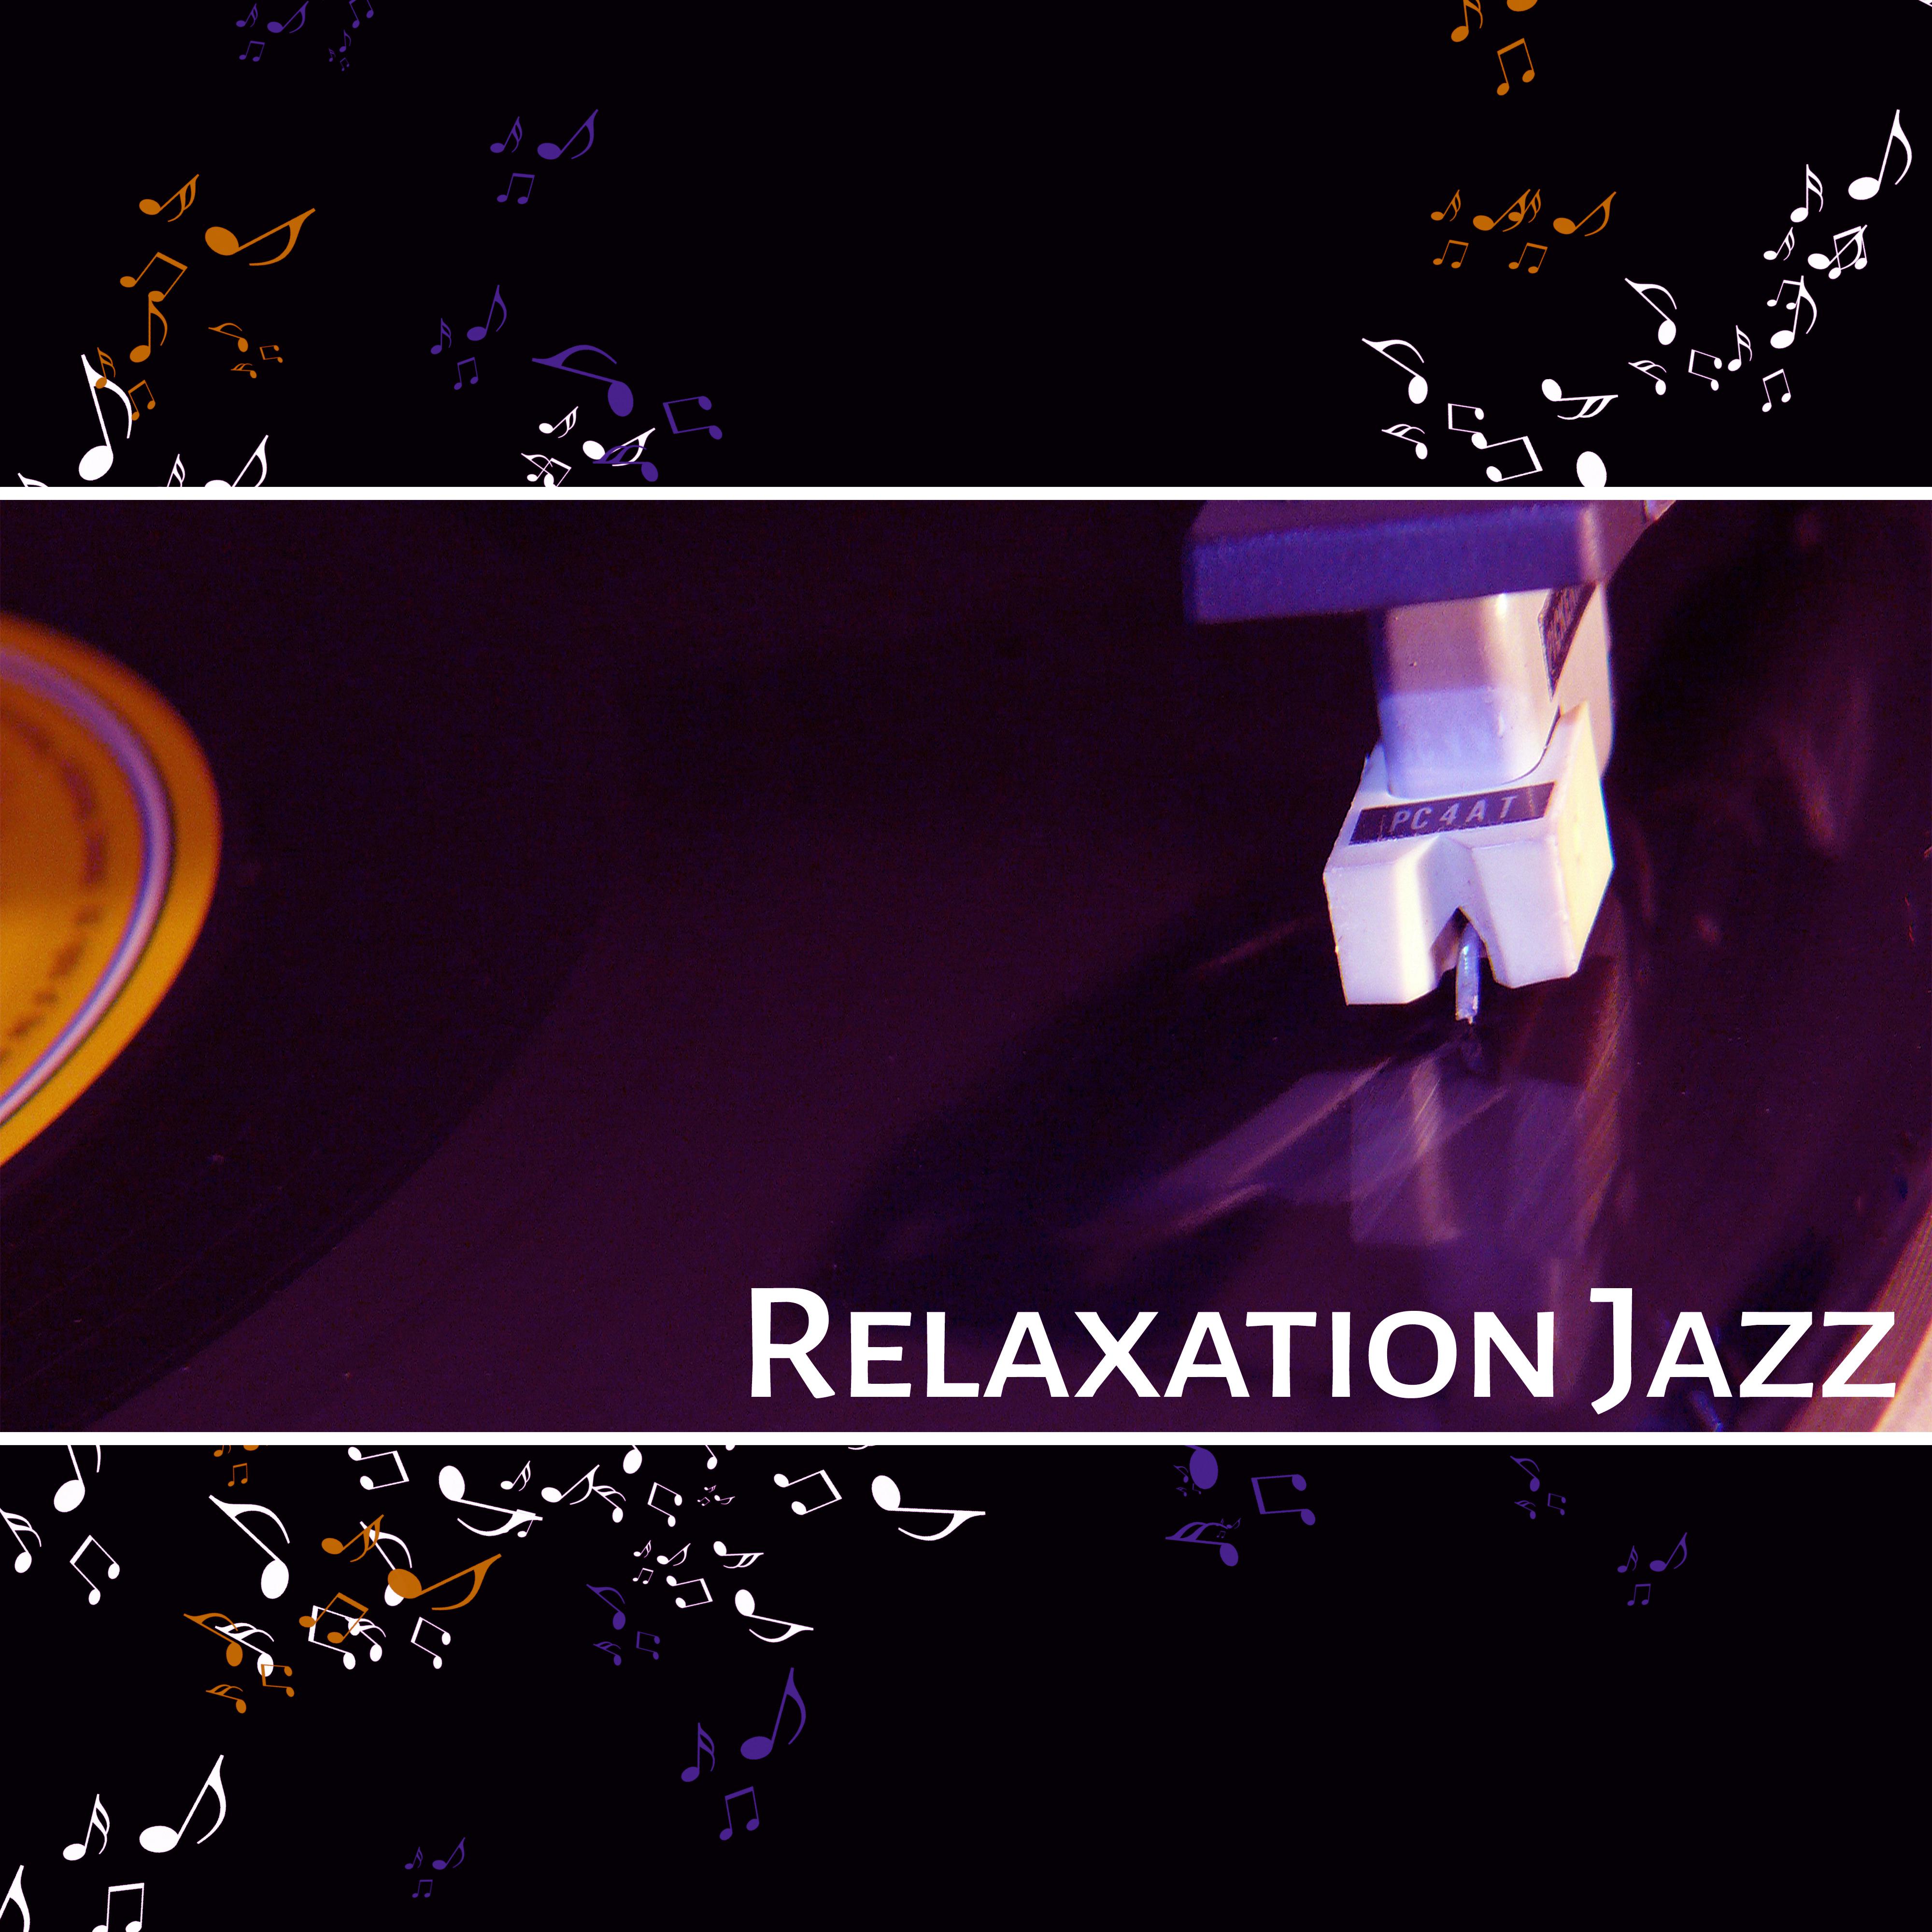 Relaxation Jazz – Instrumental Lounge Music 2016, Piano Solo, Smooth Jazz